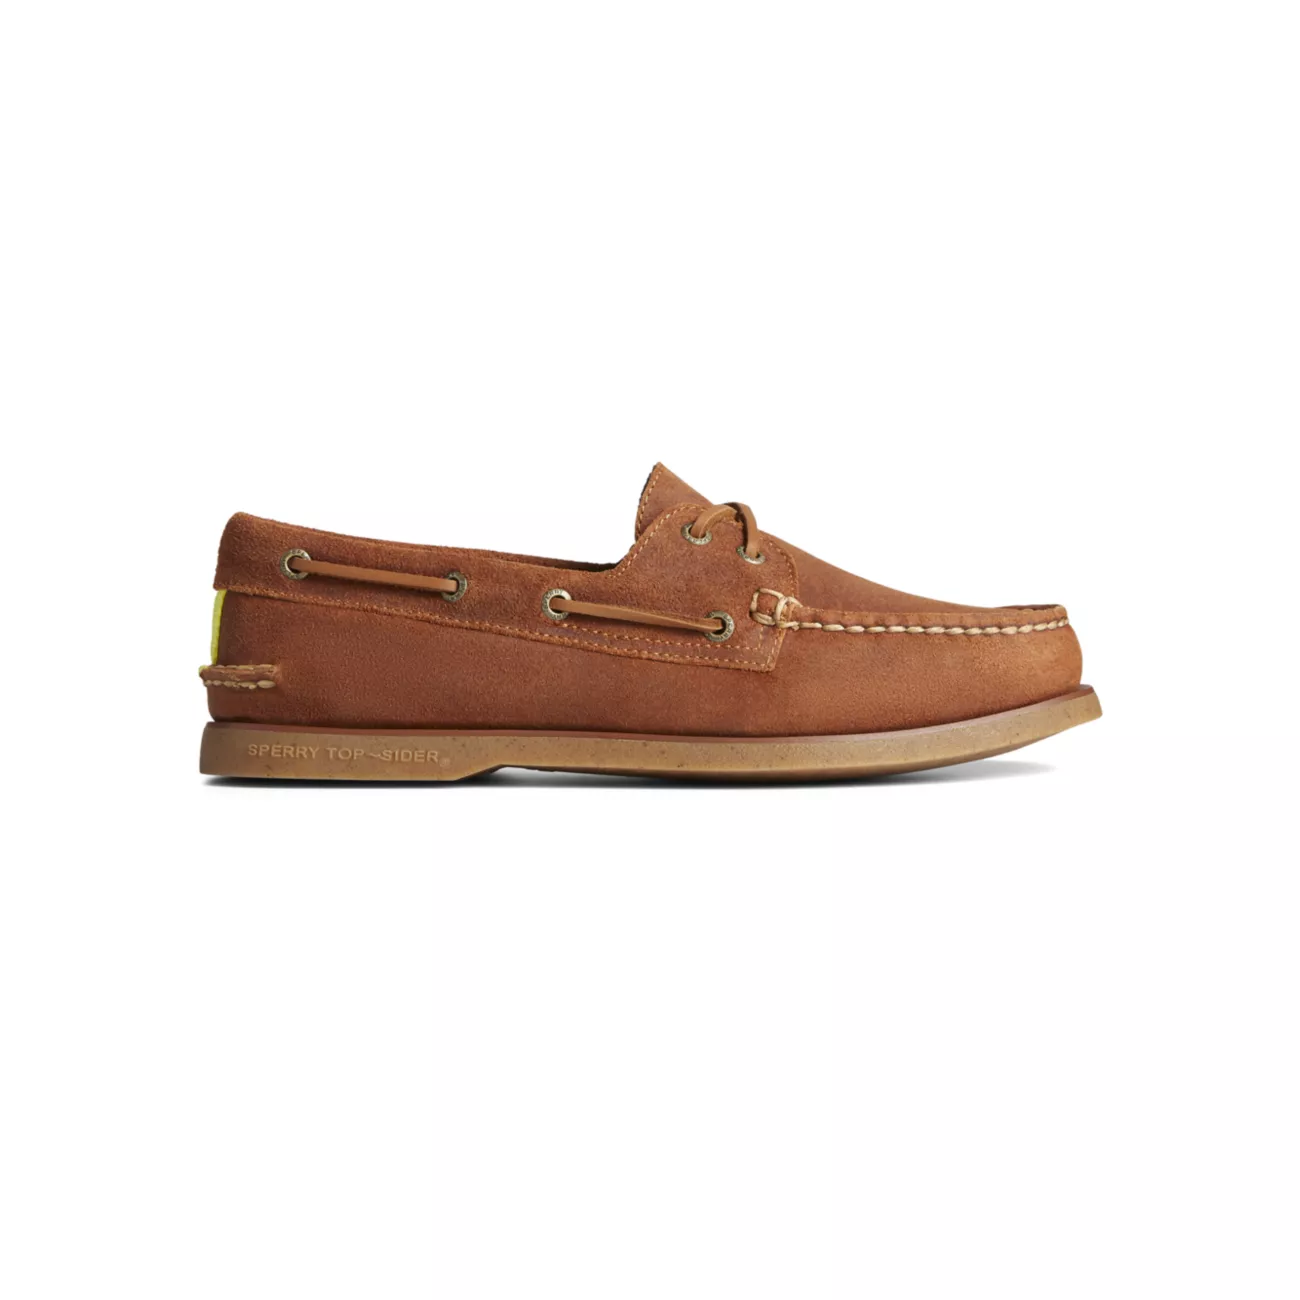 Gold Cup Suede Boat Shoes Sperry